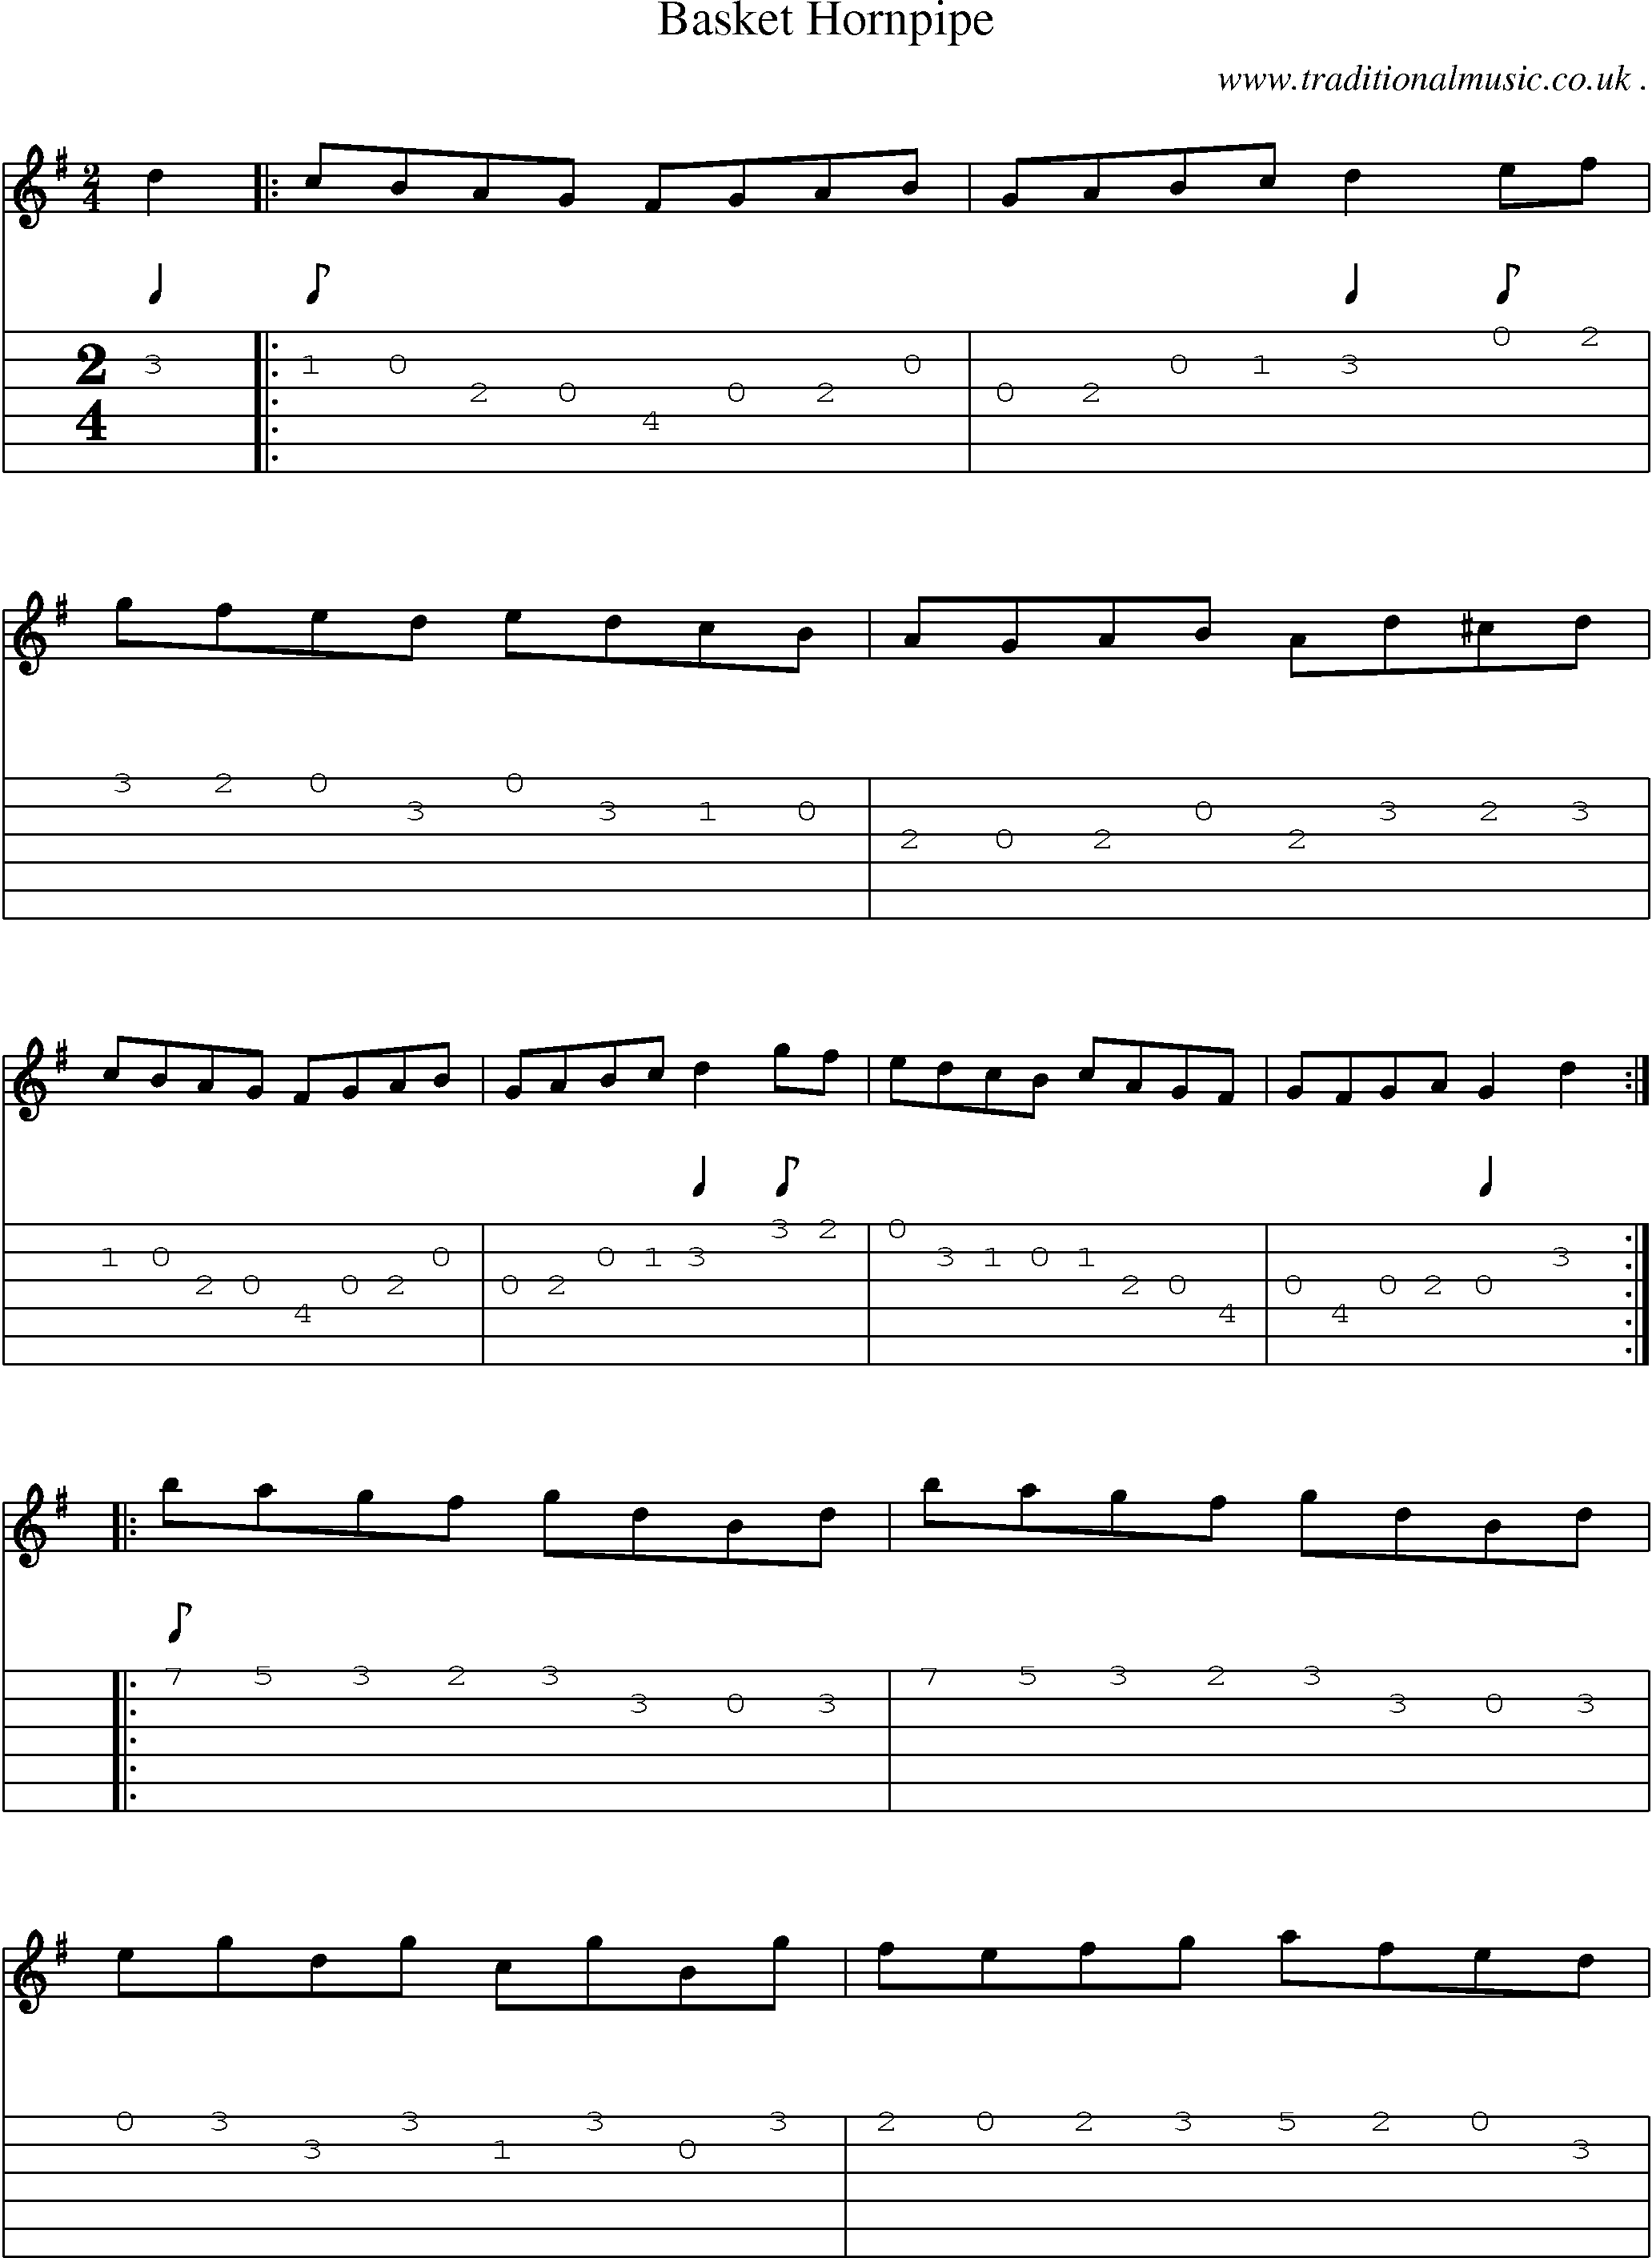 Sheet-Music and Guitar Tabs for Basket Hornpipe